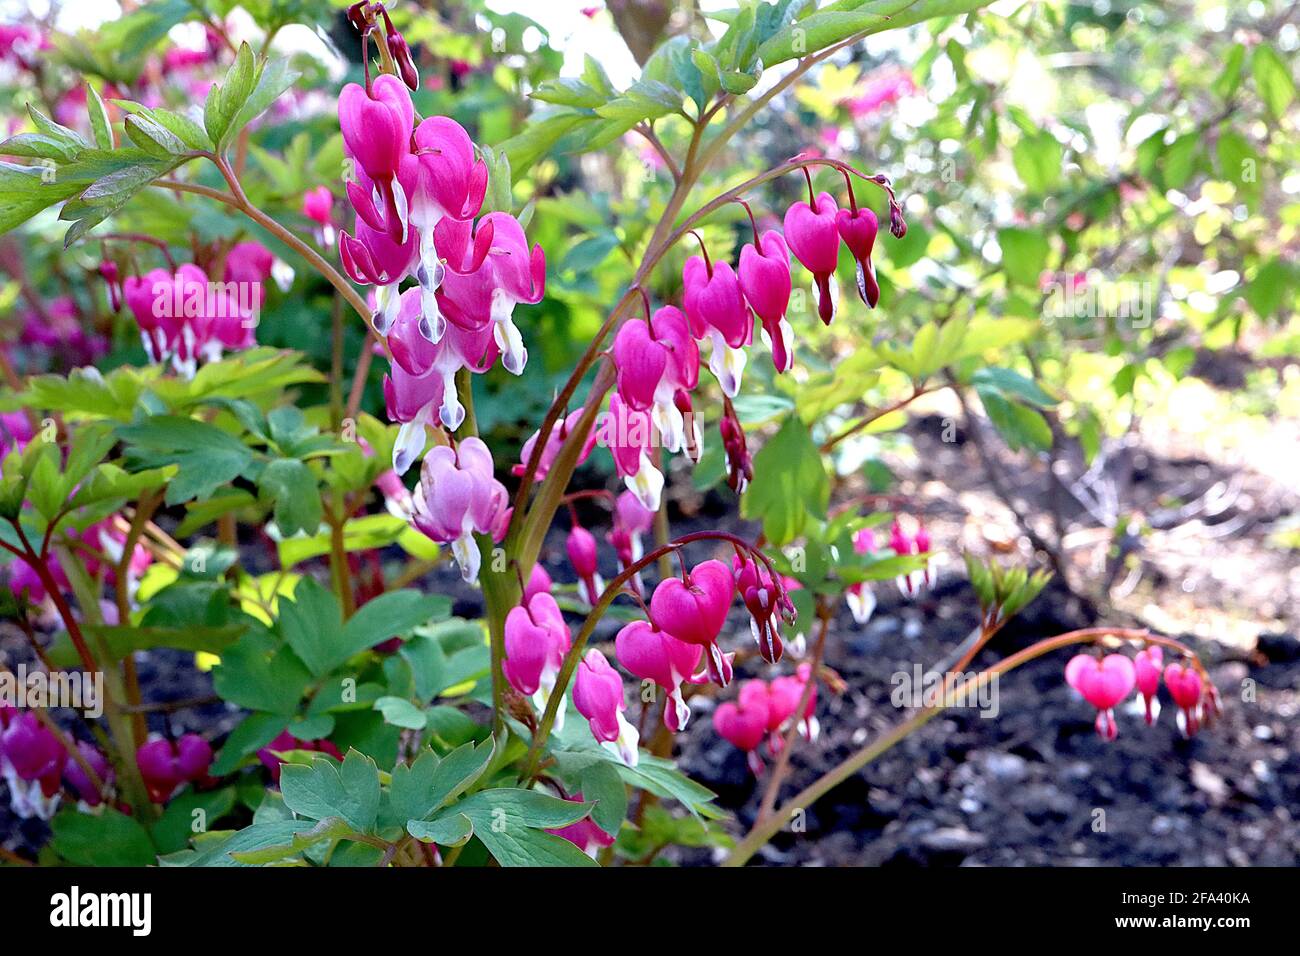 Lamprocapnos spectabilis  Dicentra spectabilis – pink heart-shaped flowers with white droplets, April, England, UK Stock Photo